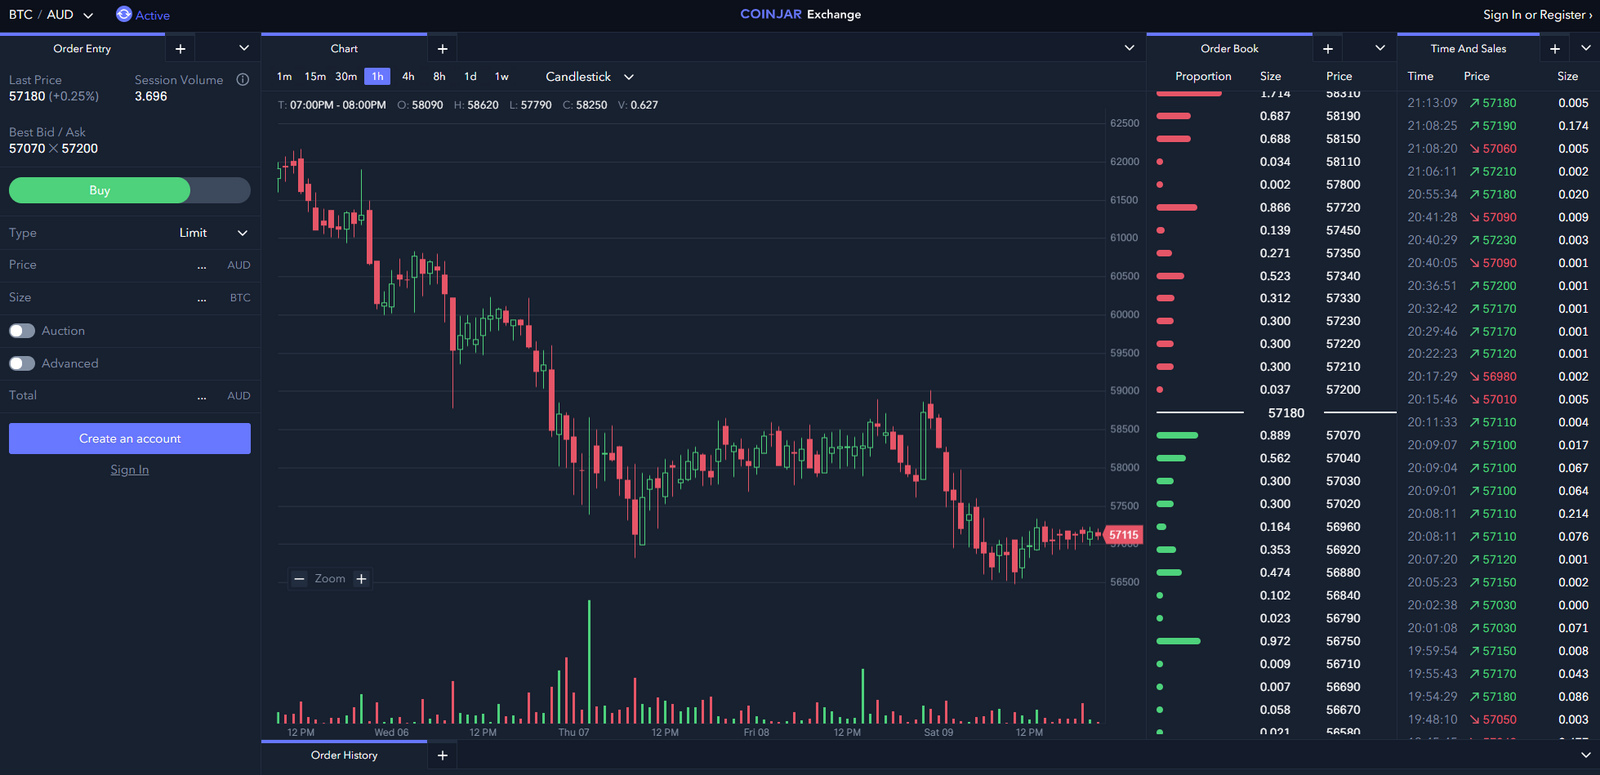 coinjar exchange charting interface